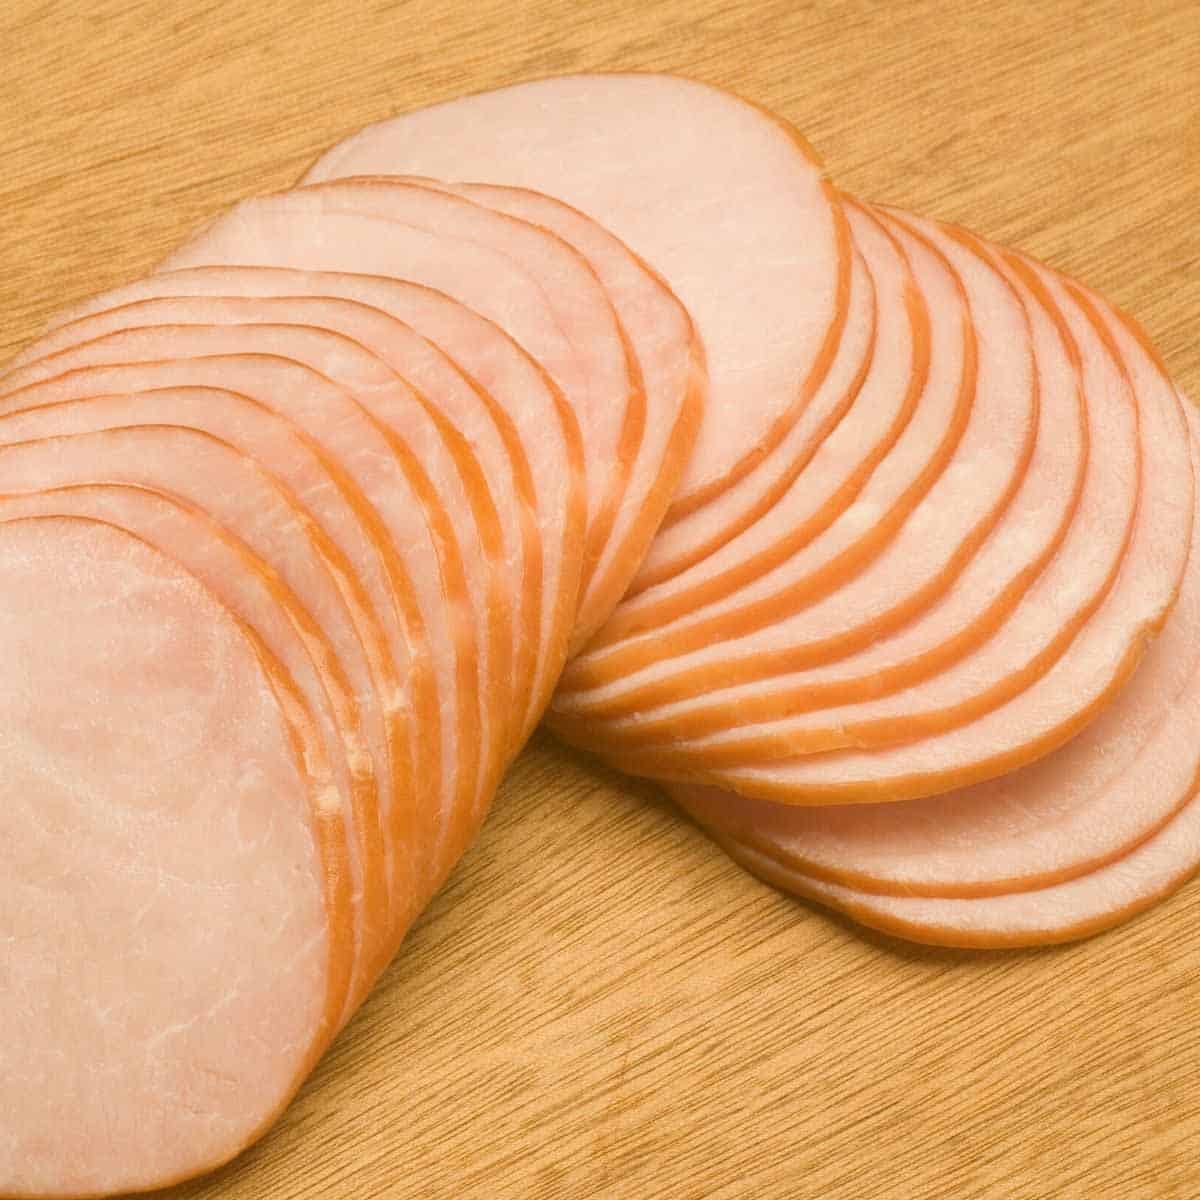 Sliced rounds of Canadian bacon on a wooden cutting board.